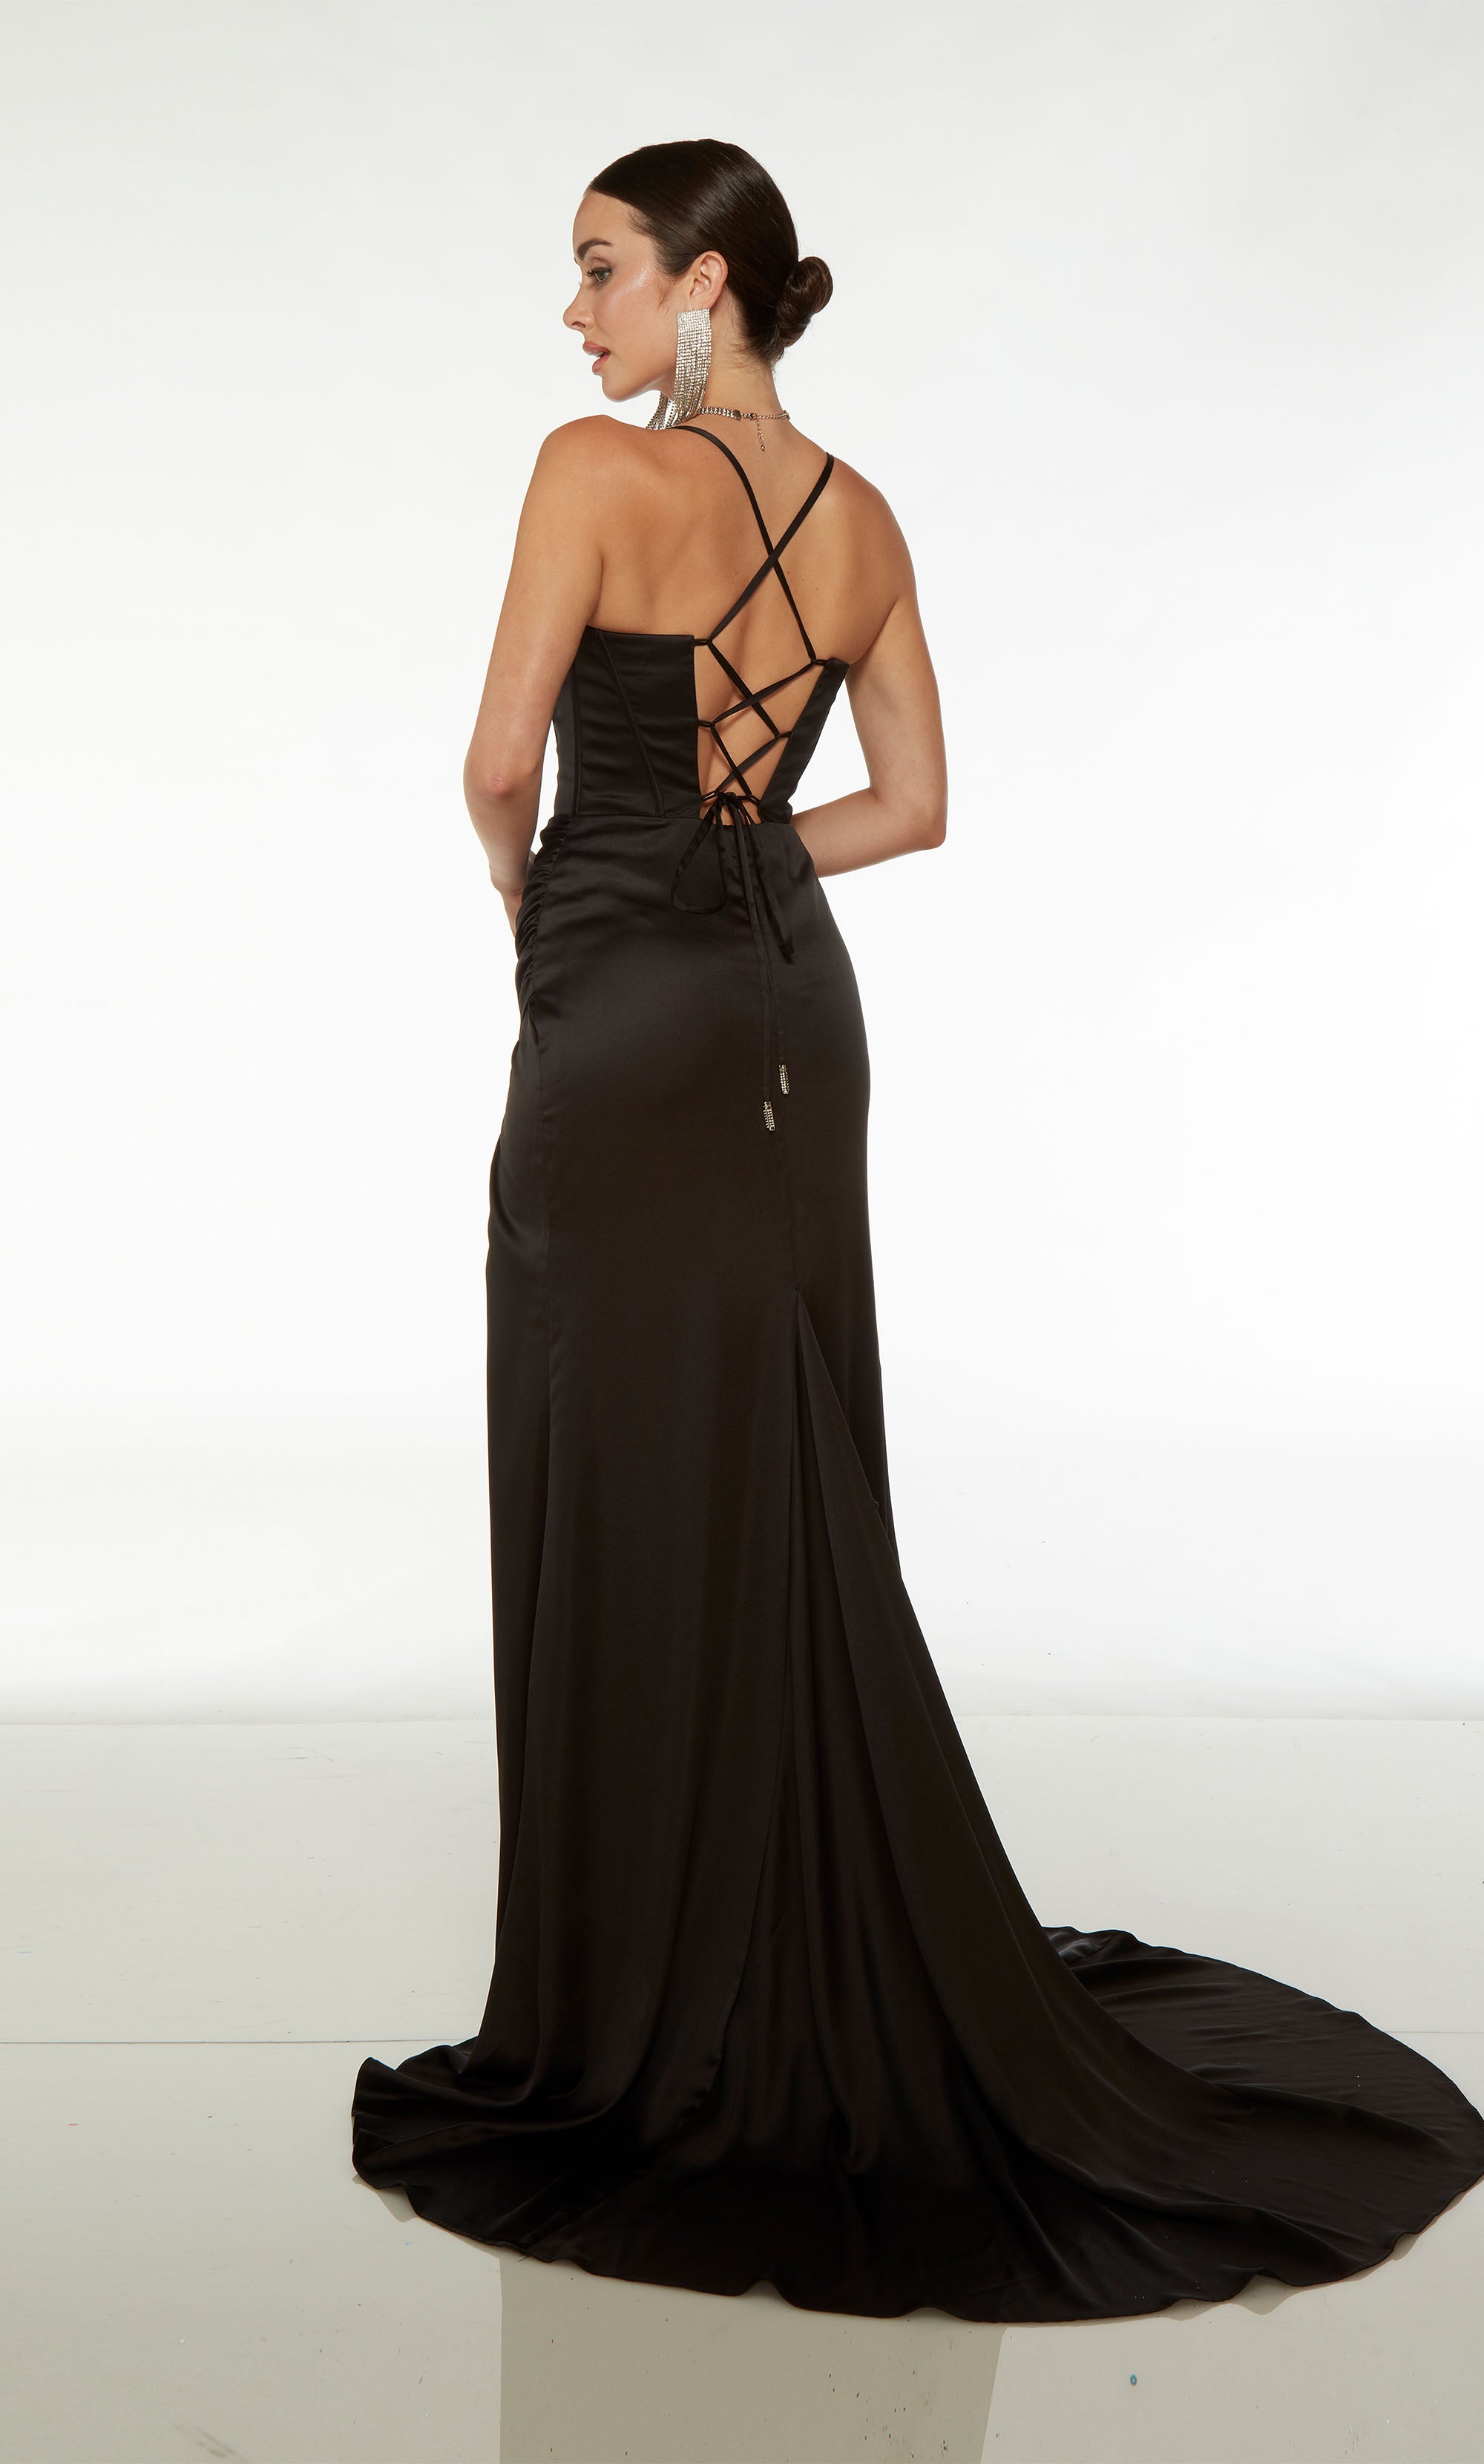 Black satin corset dress with an cowl sweetheart neckline, dual straps, high slit, crisscross lace-up back, and an elegant train.